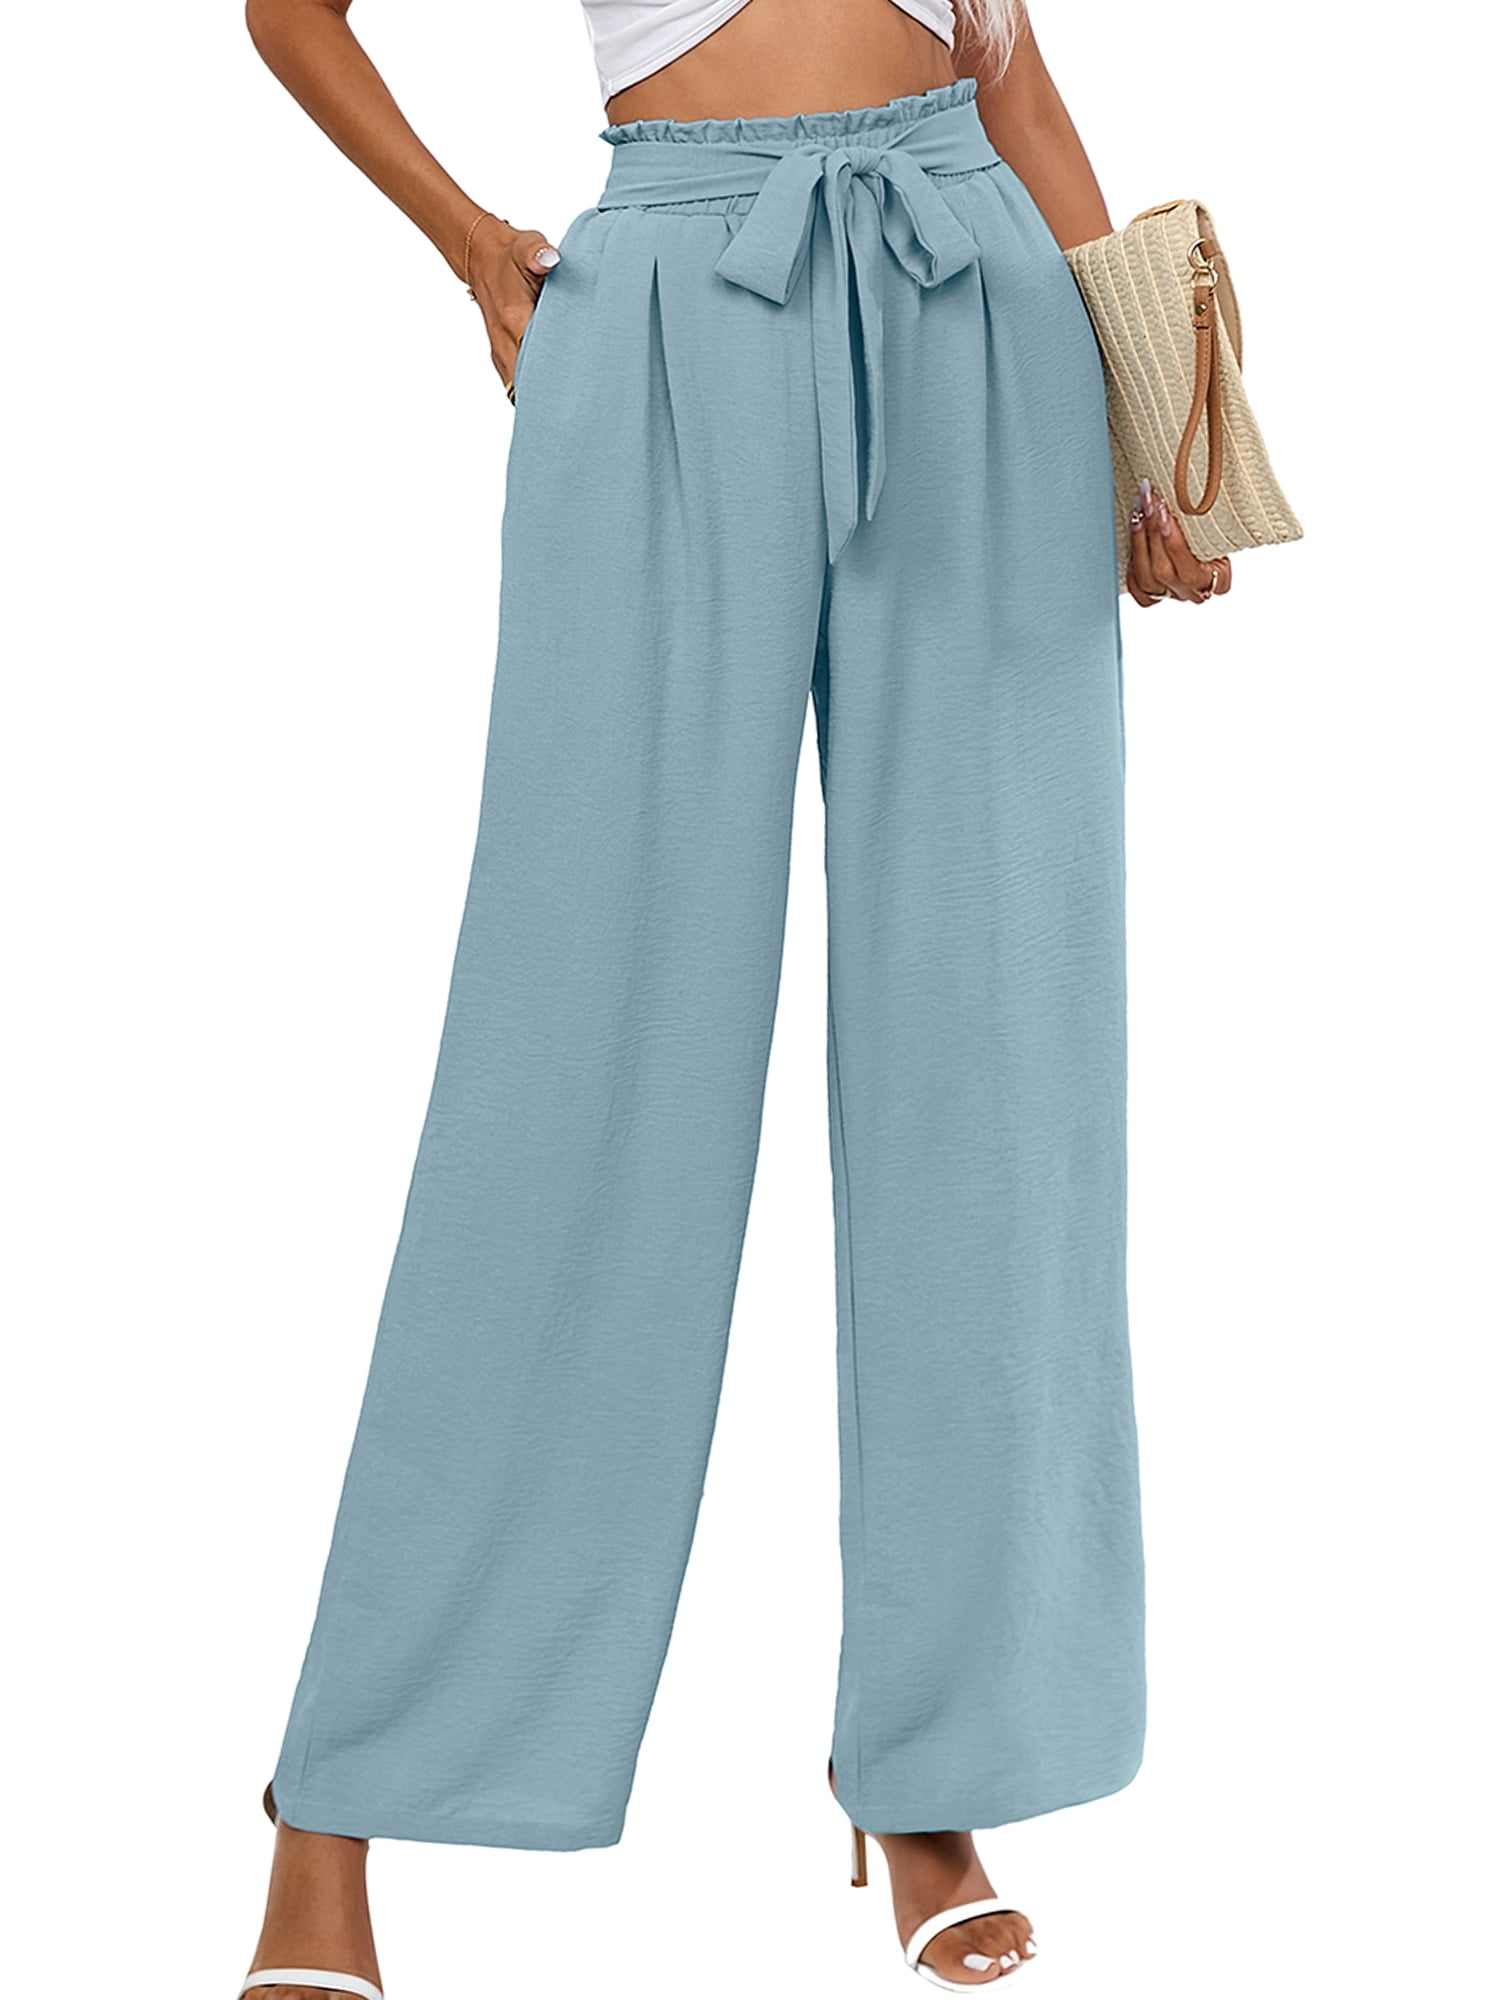 Chiclily Women's Wide Leg Pants with Pockets Lightweight High